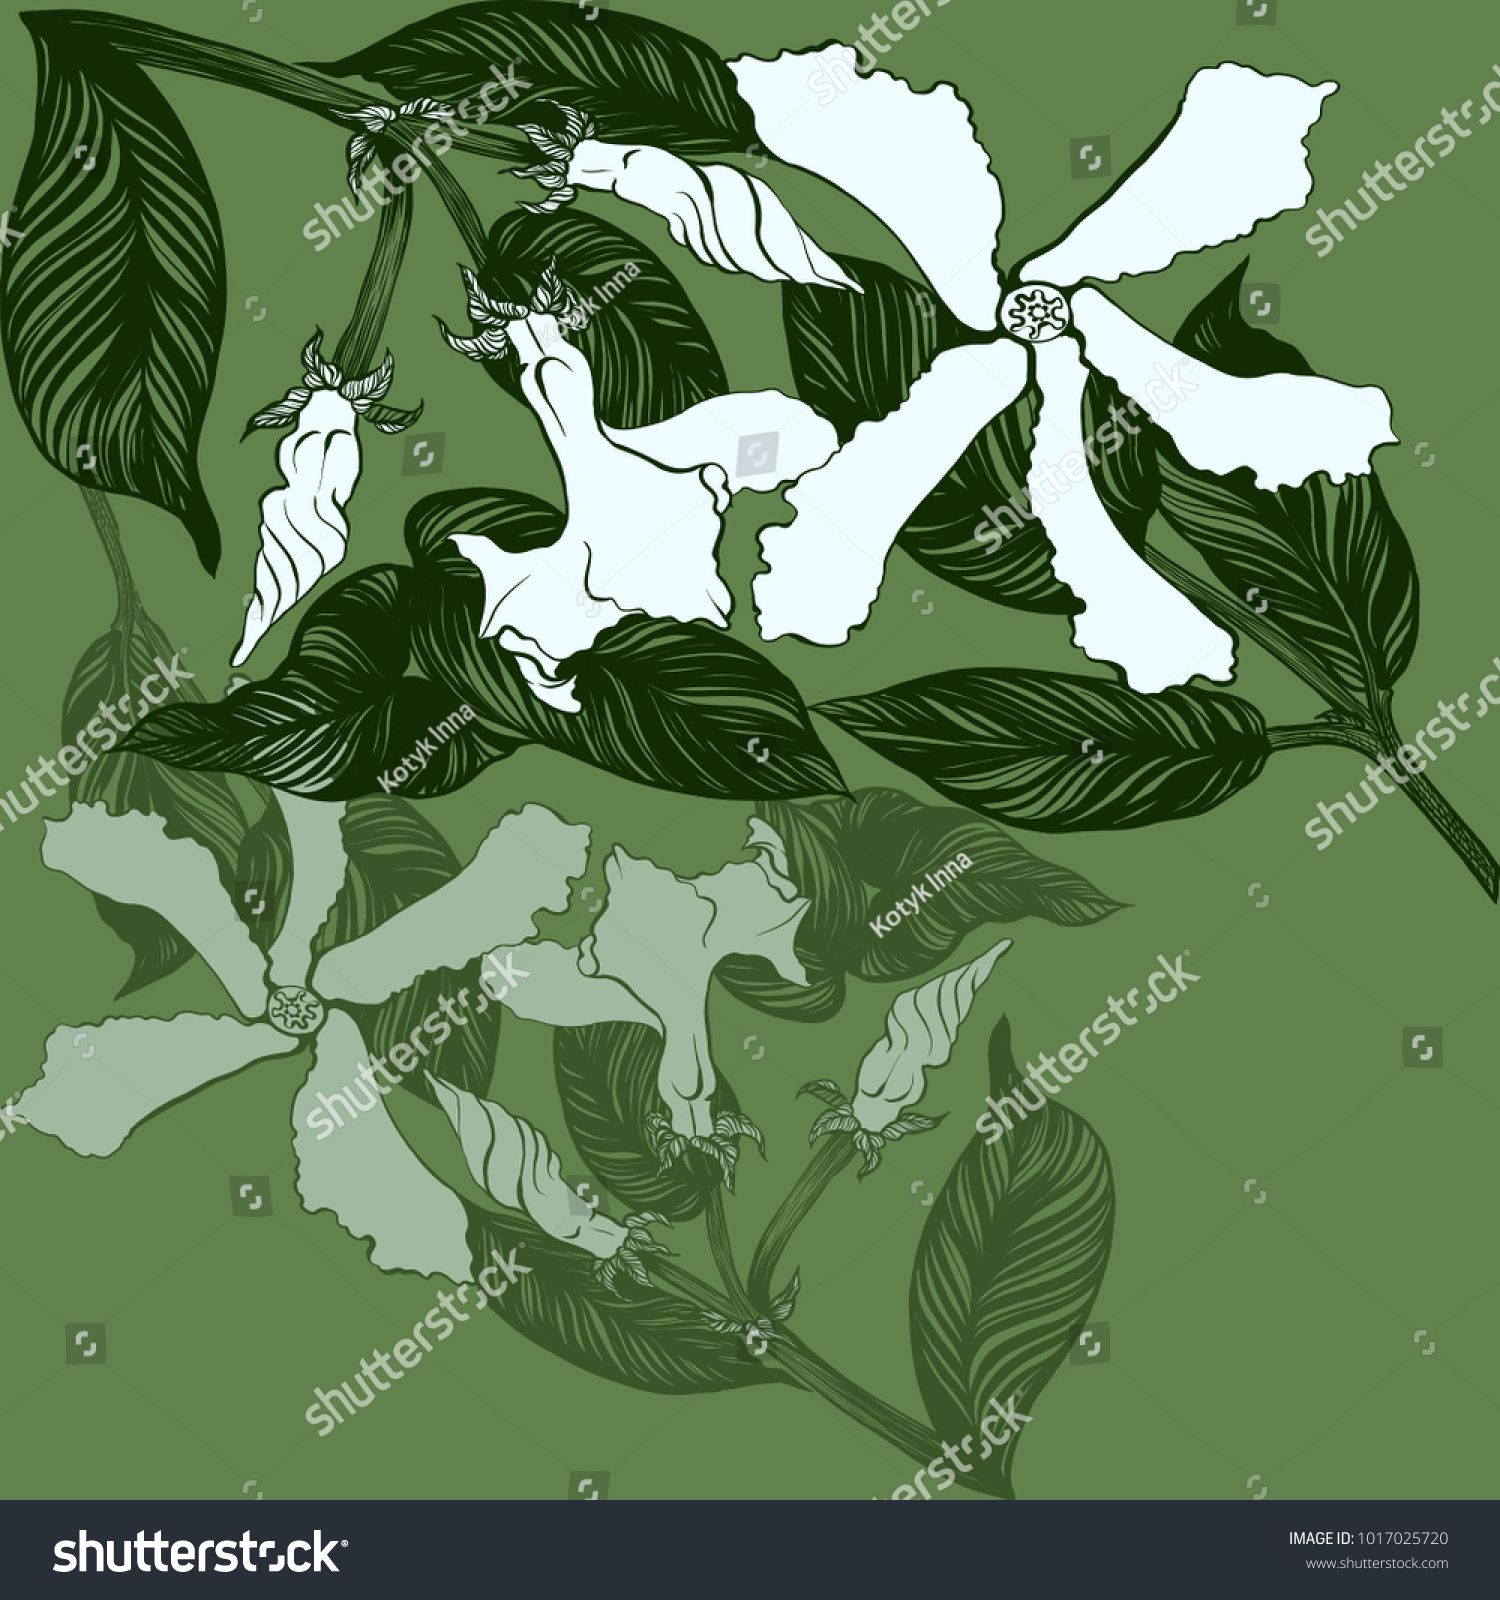 Jasmine - flowers, buds, leaves. Vector image. Wallpaper. Use printed materials, decoupage maps, posters, postcards, packaging. #1017025720